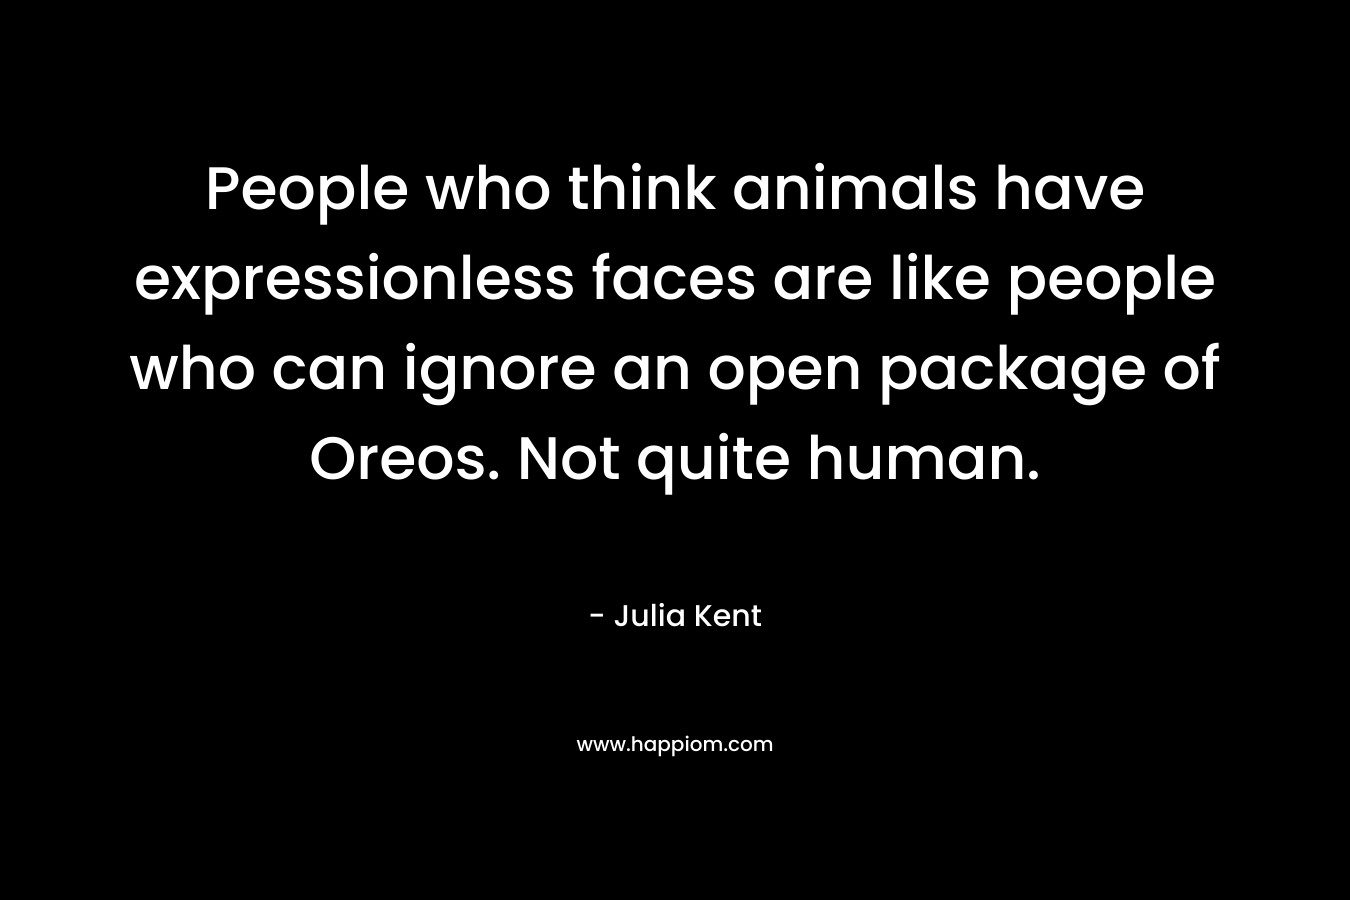 People who think animals have expressionless faces are like people who can ignore an open package of Oreos. Not quite human.